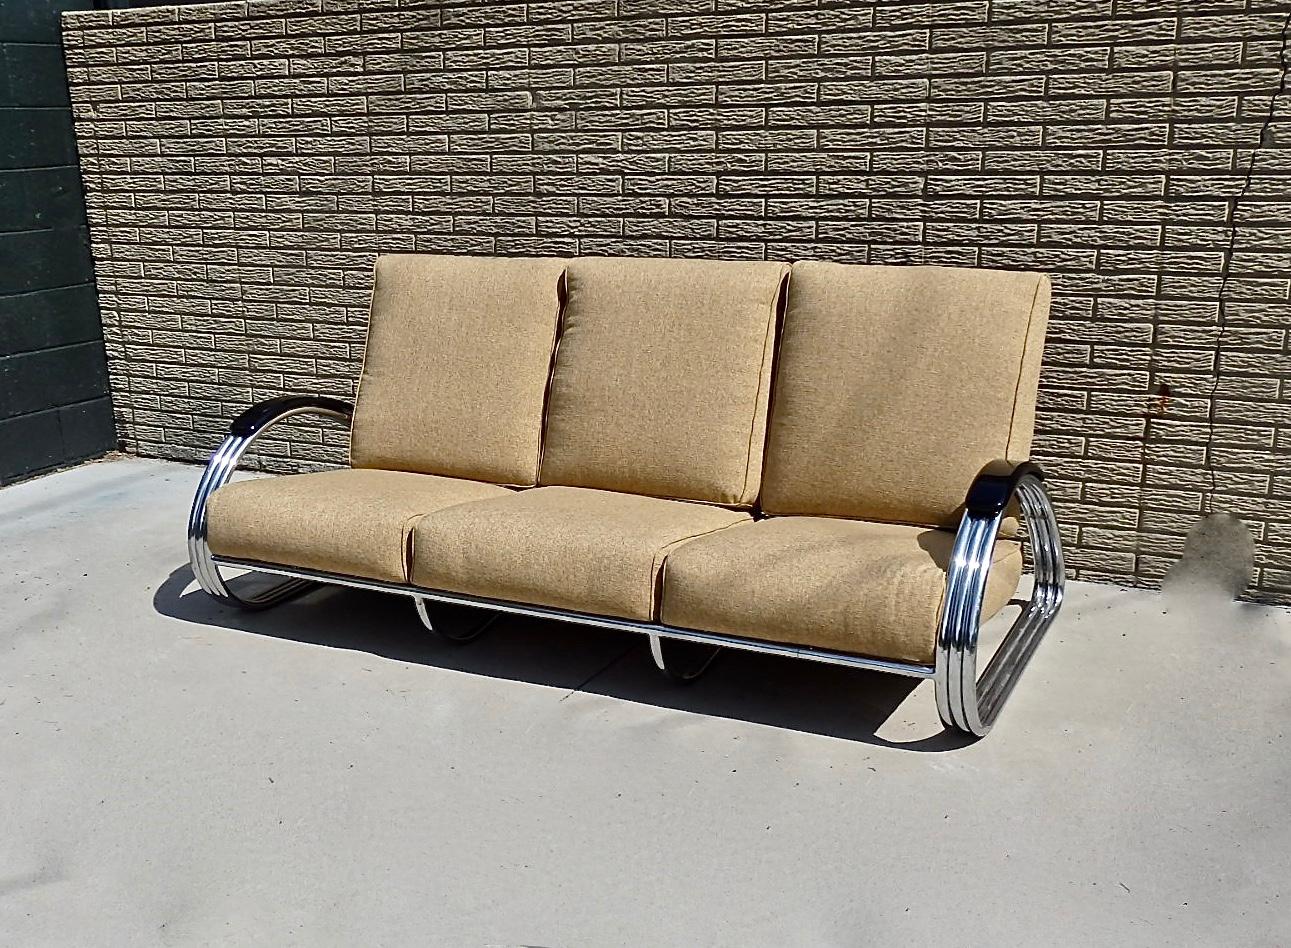 Sexy art deco machine age moderne chrome frame tear drop arm loose cushion sofa. Designed by KEM Weber for Lloyd in the 1930s. Cushions shown in original vinyl which has been replaced do show wear and age. Re upholstery is recommended. Frame shows